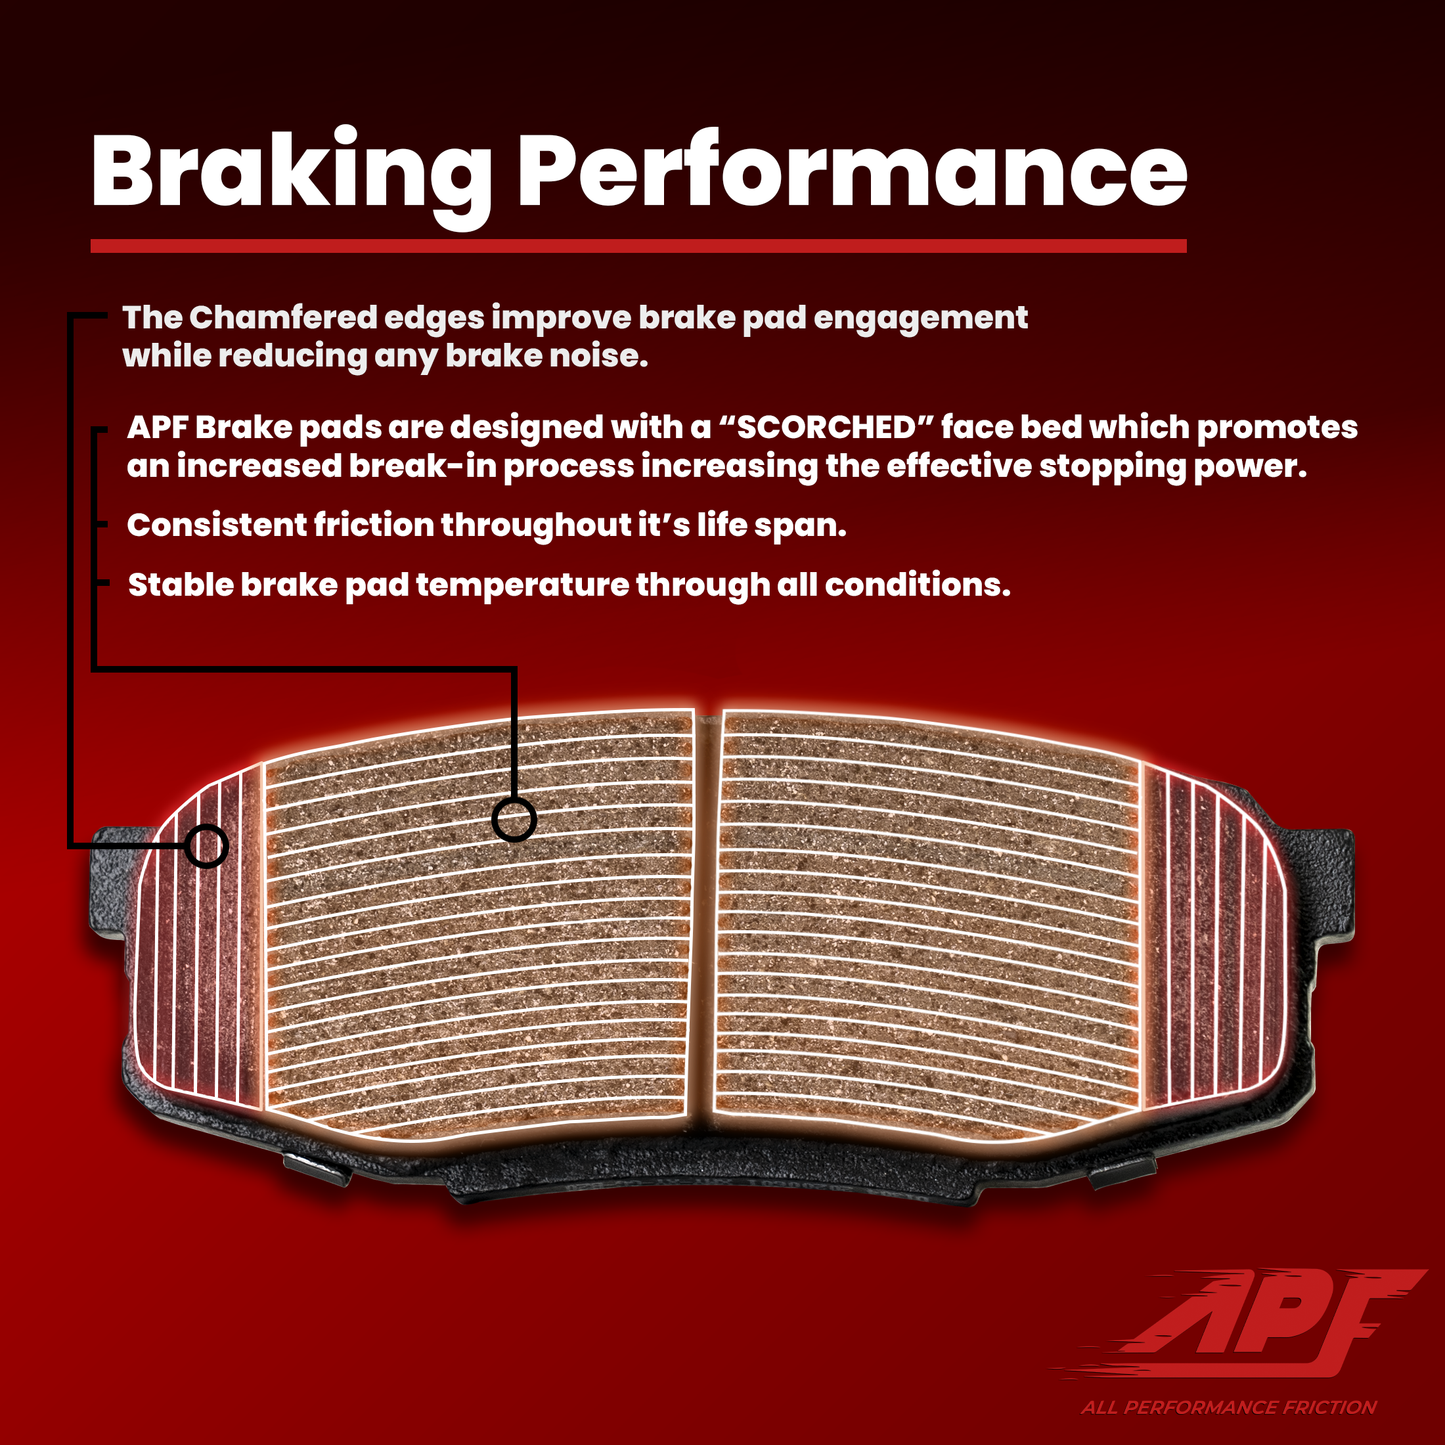 APF All Performance Friction Front and Rear Rotors and Pads Full Kit compatible with Audi A3 Quattro 2006-2009 Zinc Drilled Slotted Rotors with Ceramic Carbon Fiber Brake Pads | $474.97